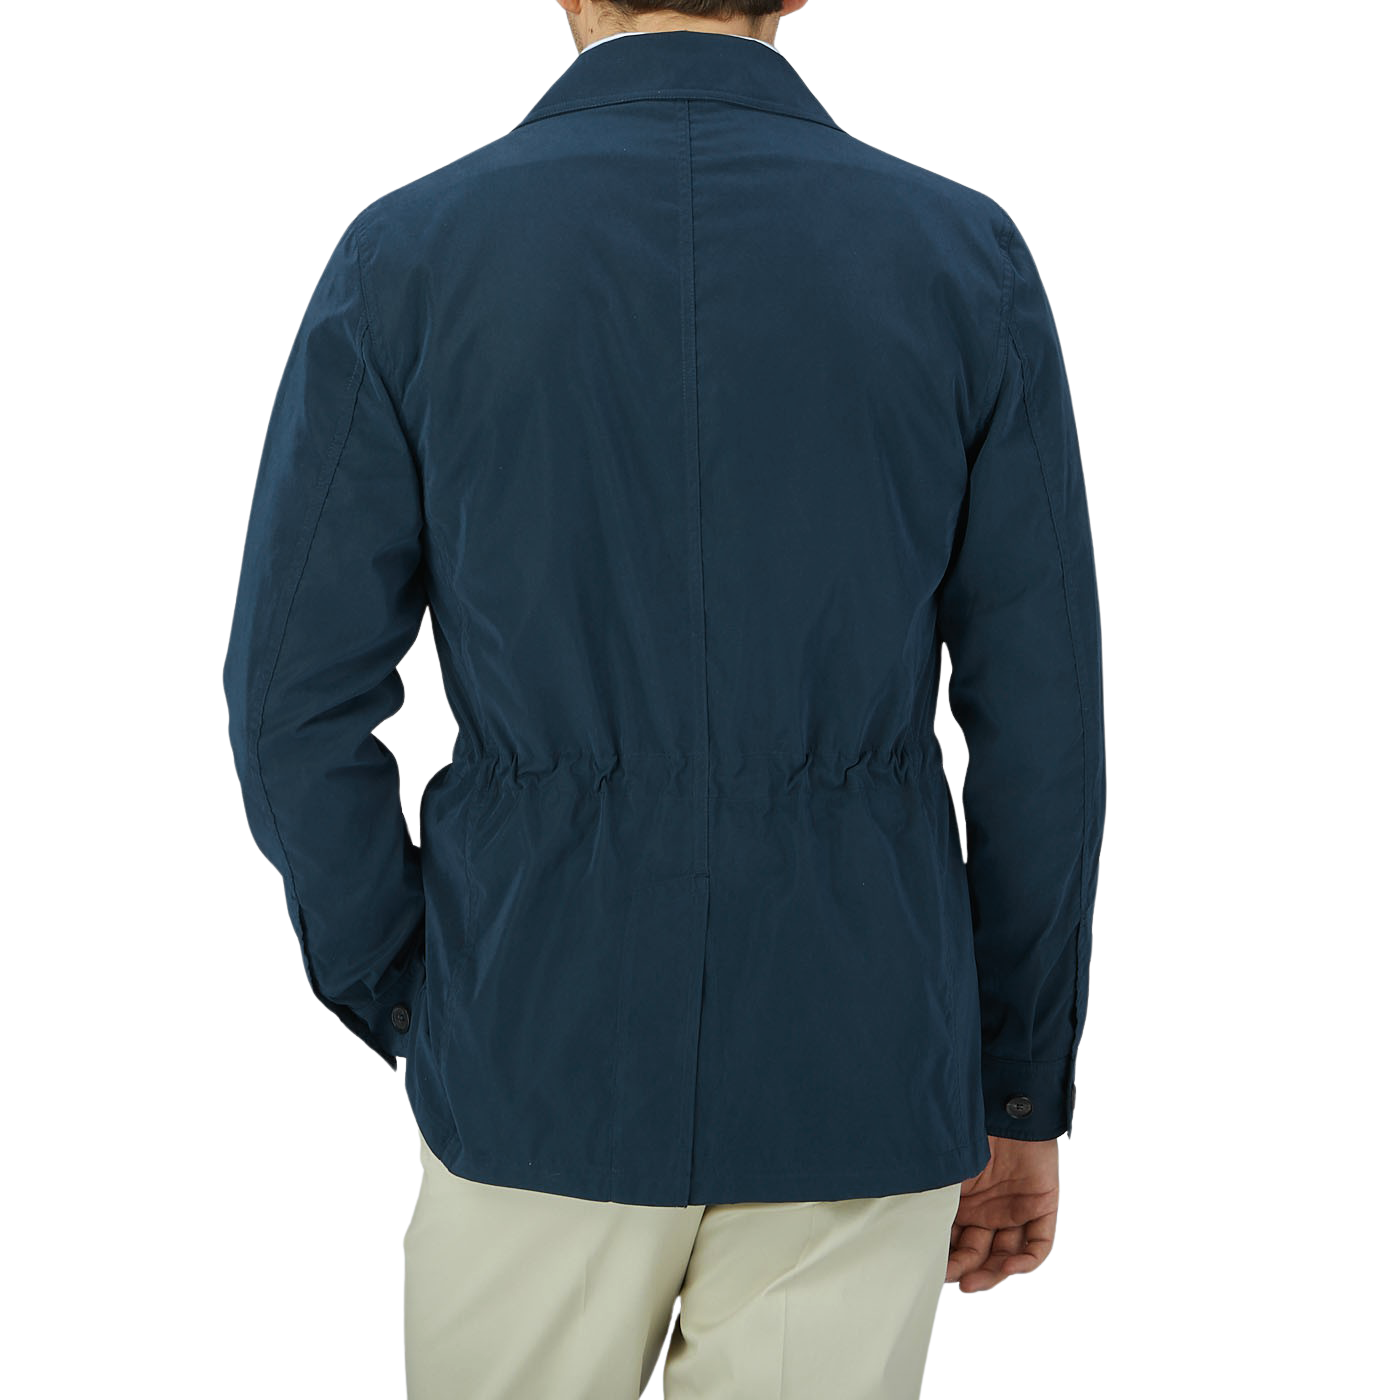 The back view of a man wearing a Manto Navy Blue Ultrafine Microfiber Safari Jacket.